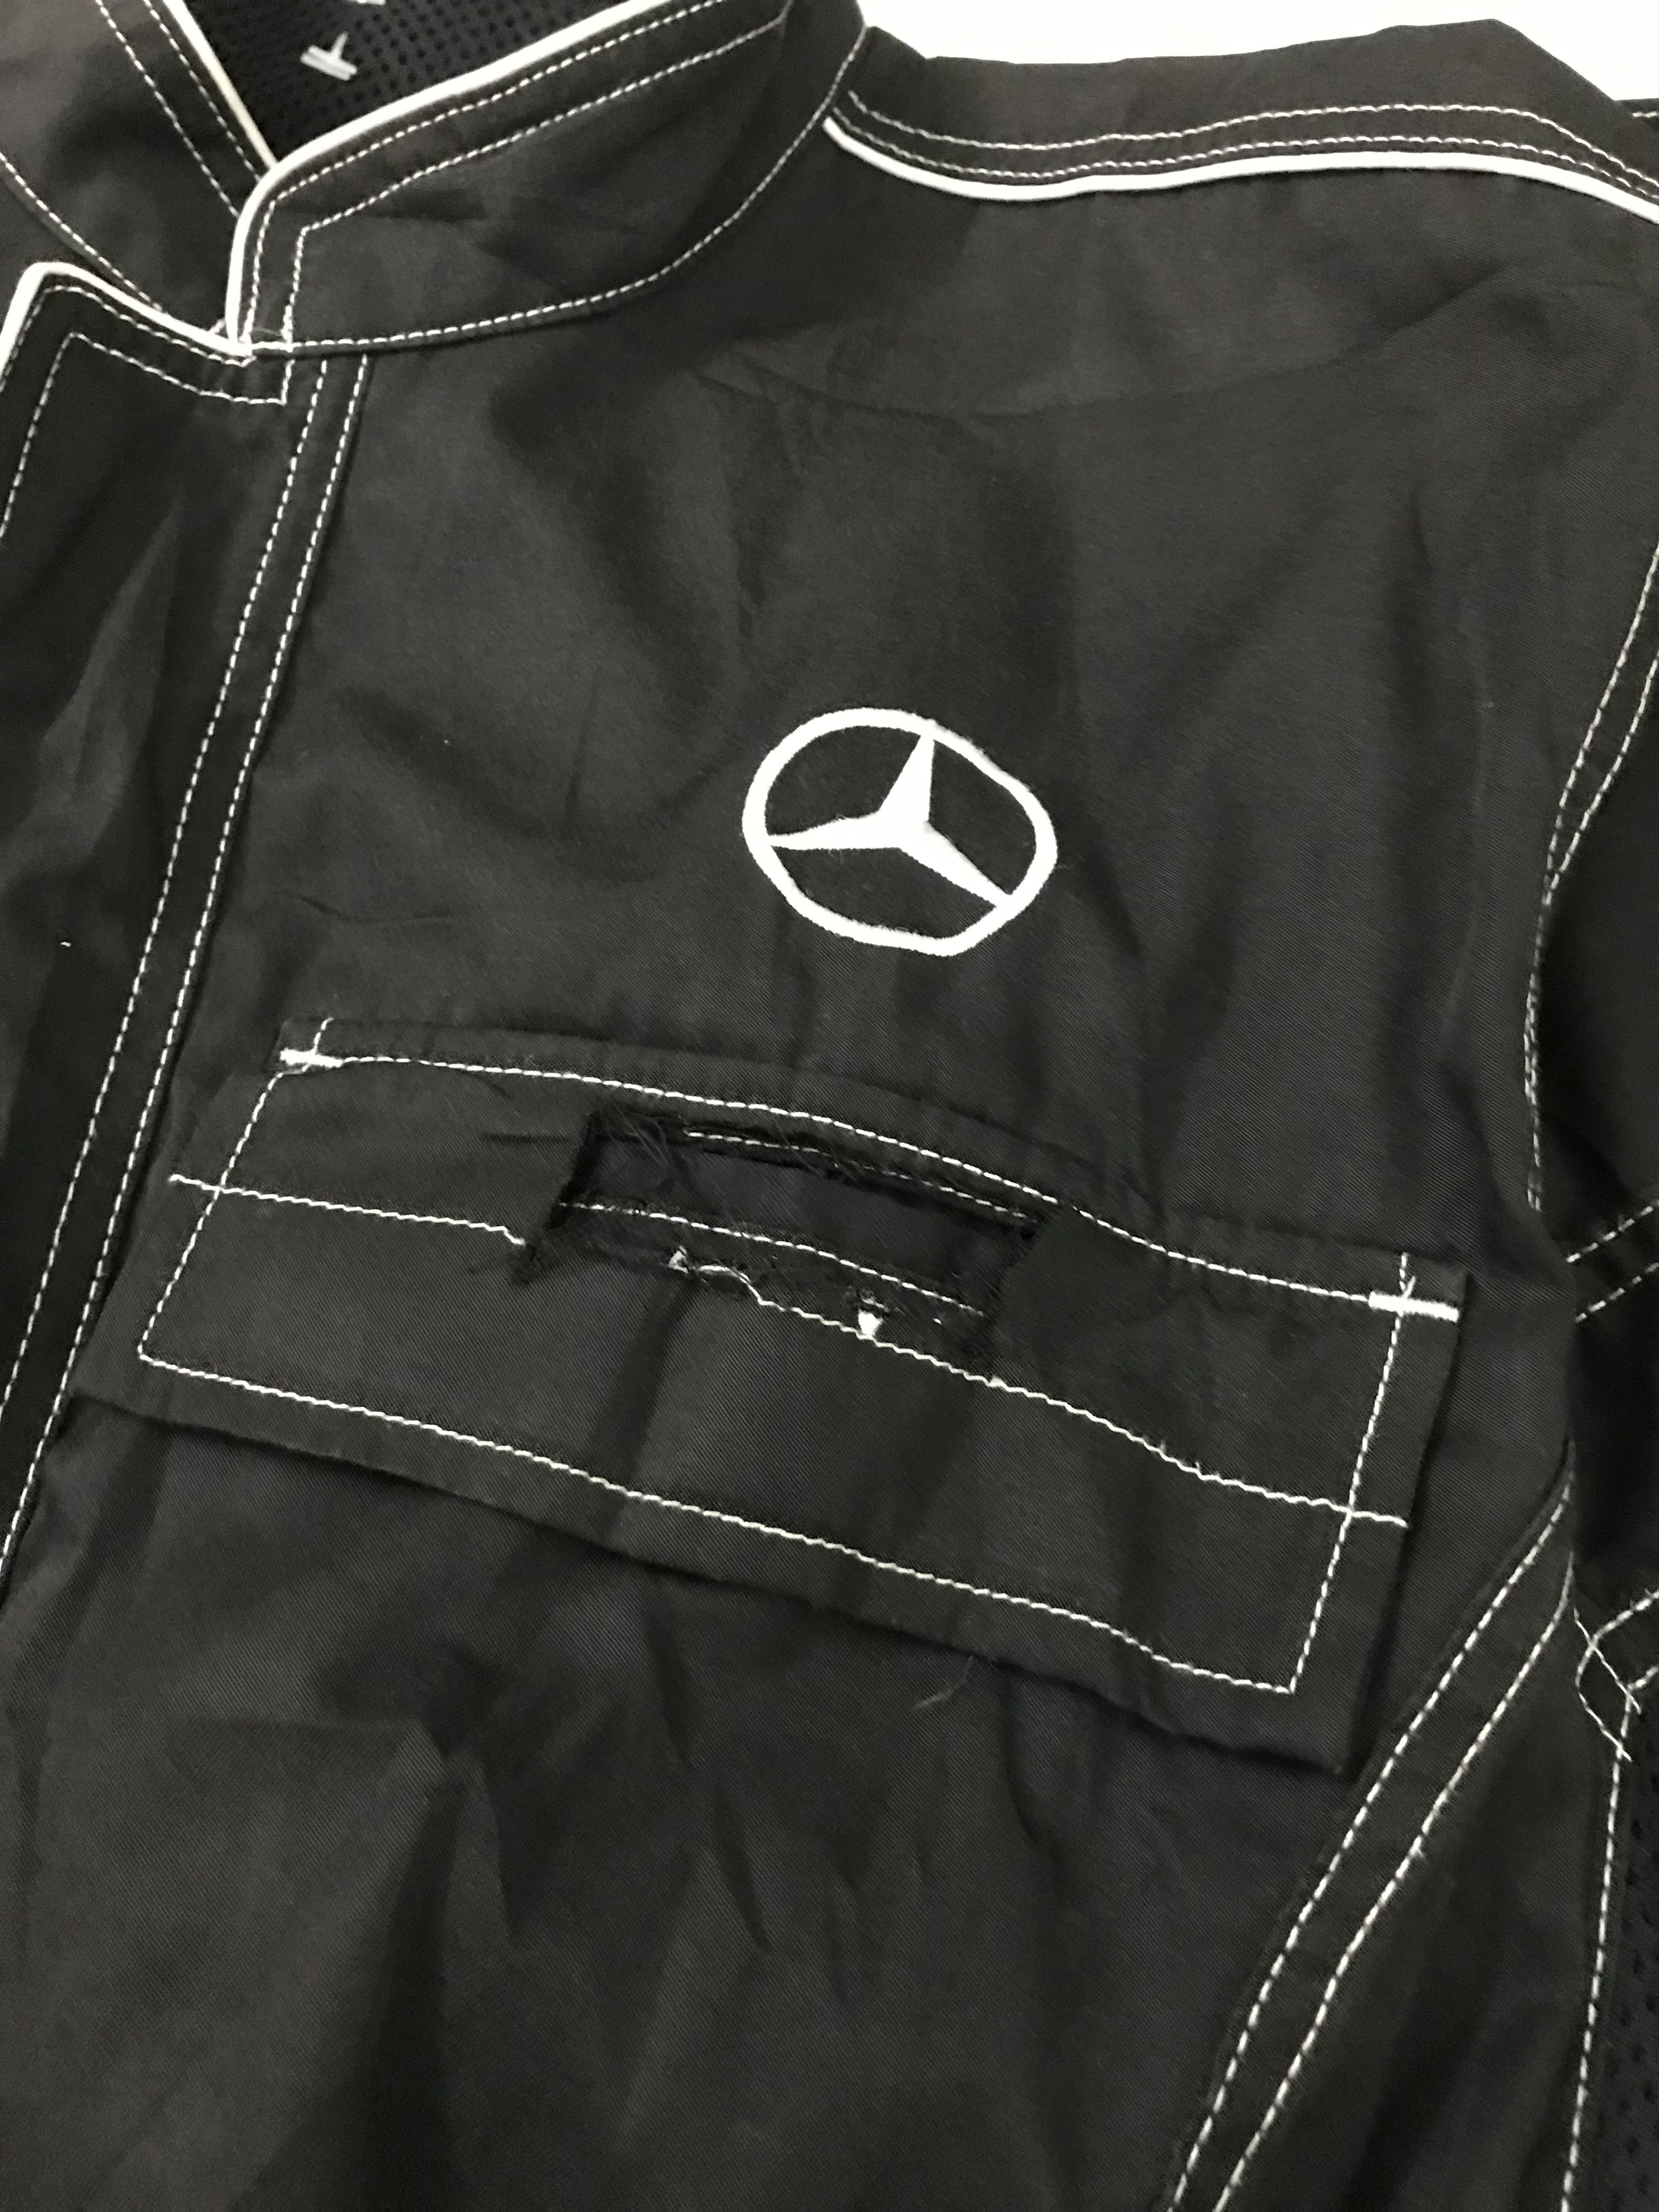 Vintage Mercedes Benz Distressed Overalls Coveralls Size US 31 - 17 Thumbnail